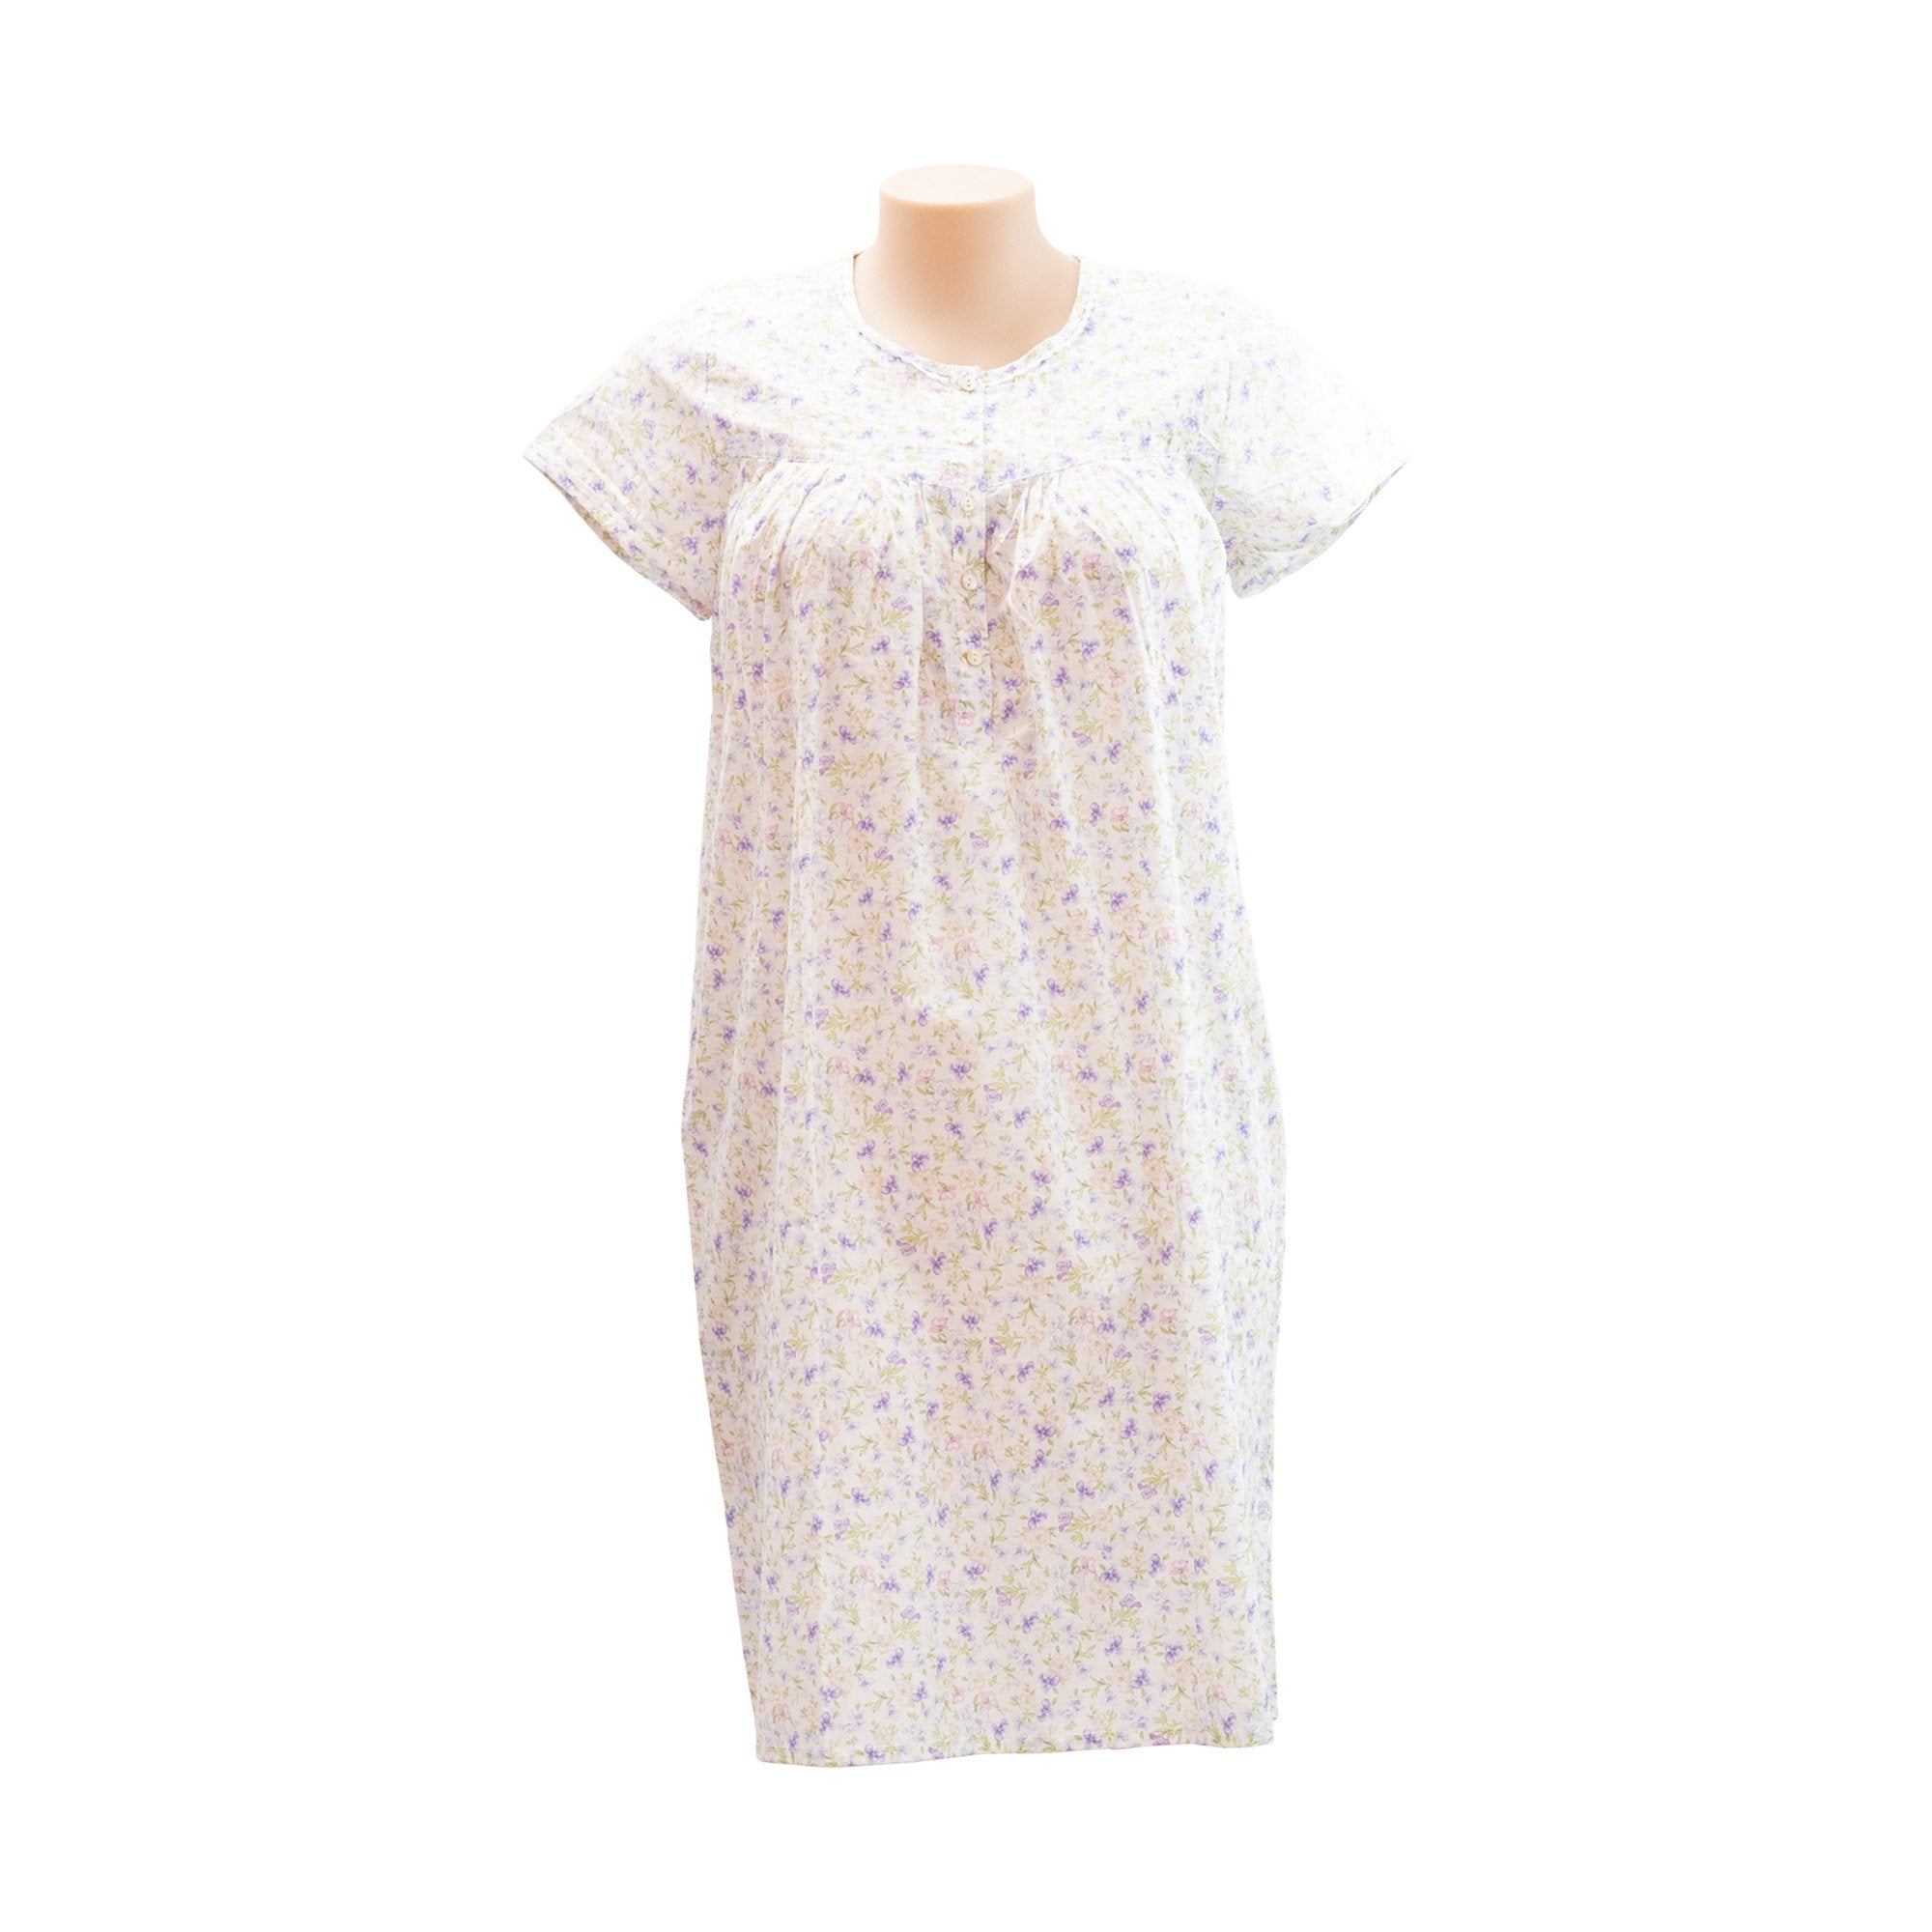 Schrank Cotton Floral Nightie SK212 - Nighties Bluelac / 10 / S  Available at Illusions Lingerie